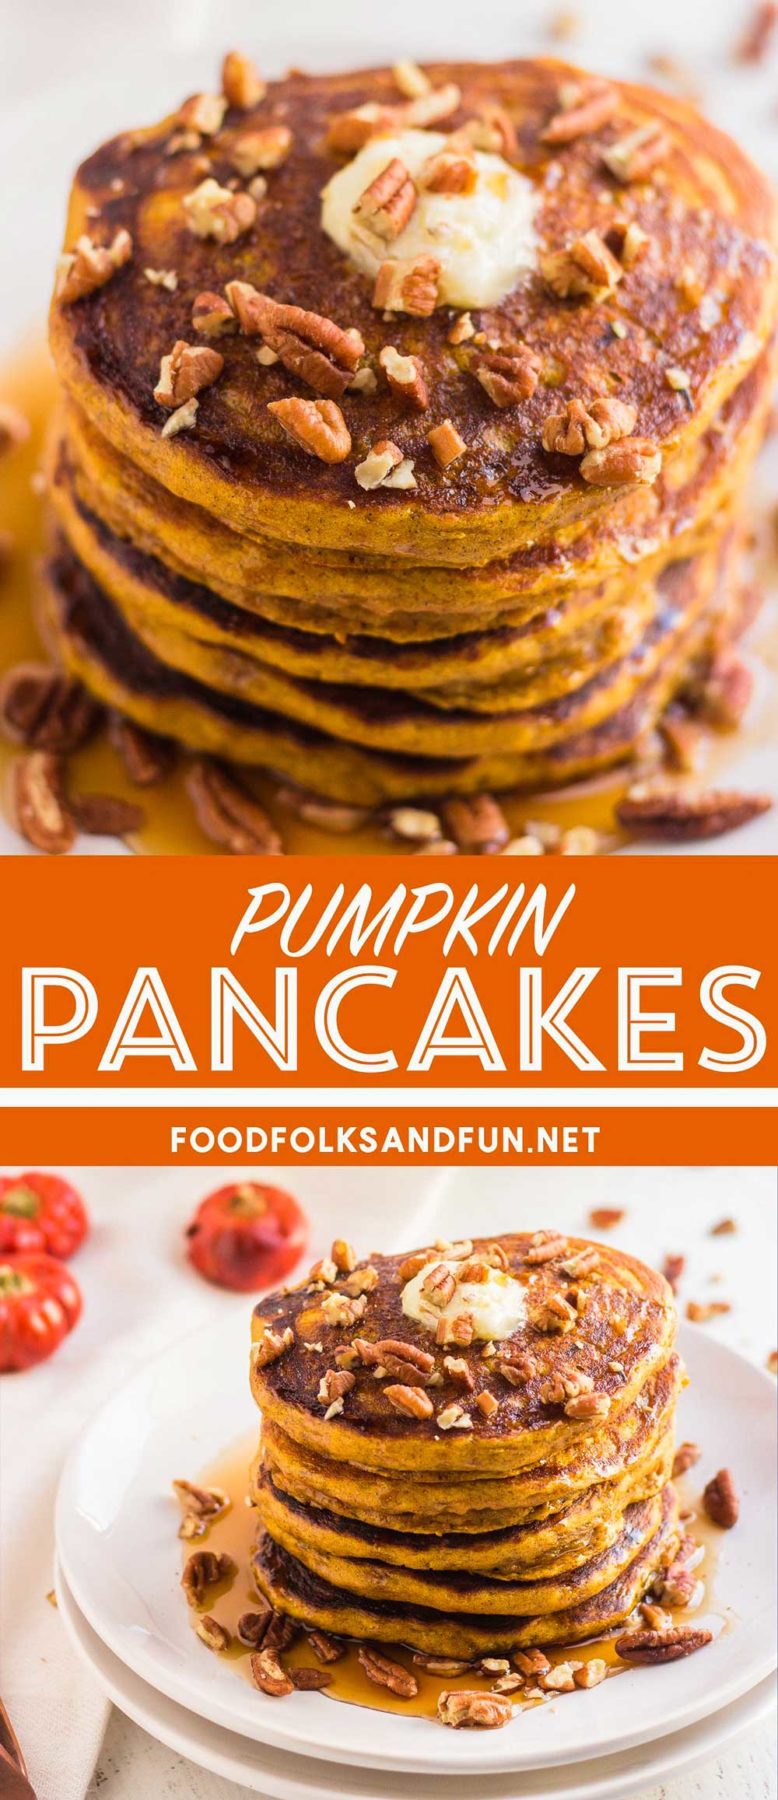 Delicious and fluffy Pumpkin Pancakes that are so easy to make. They’re perfect for Fall breakfast or brunch, and they’re always a crowd pleaser!